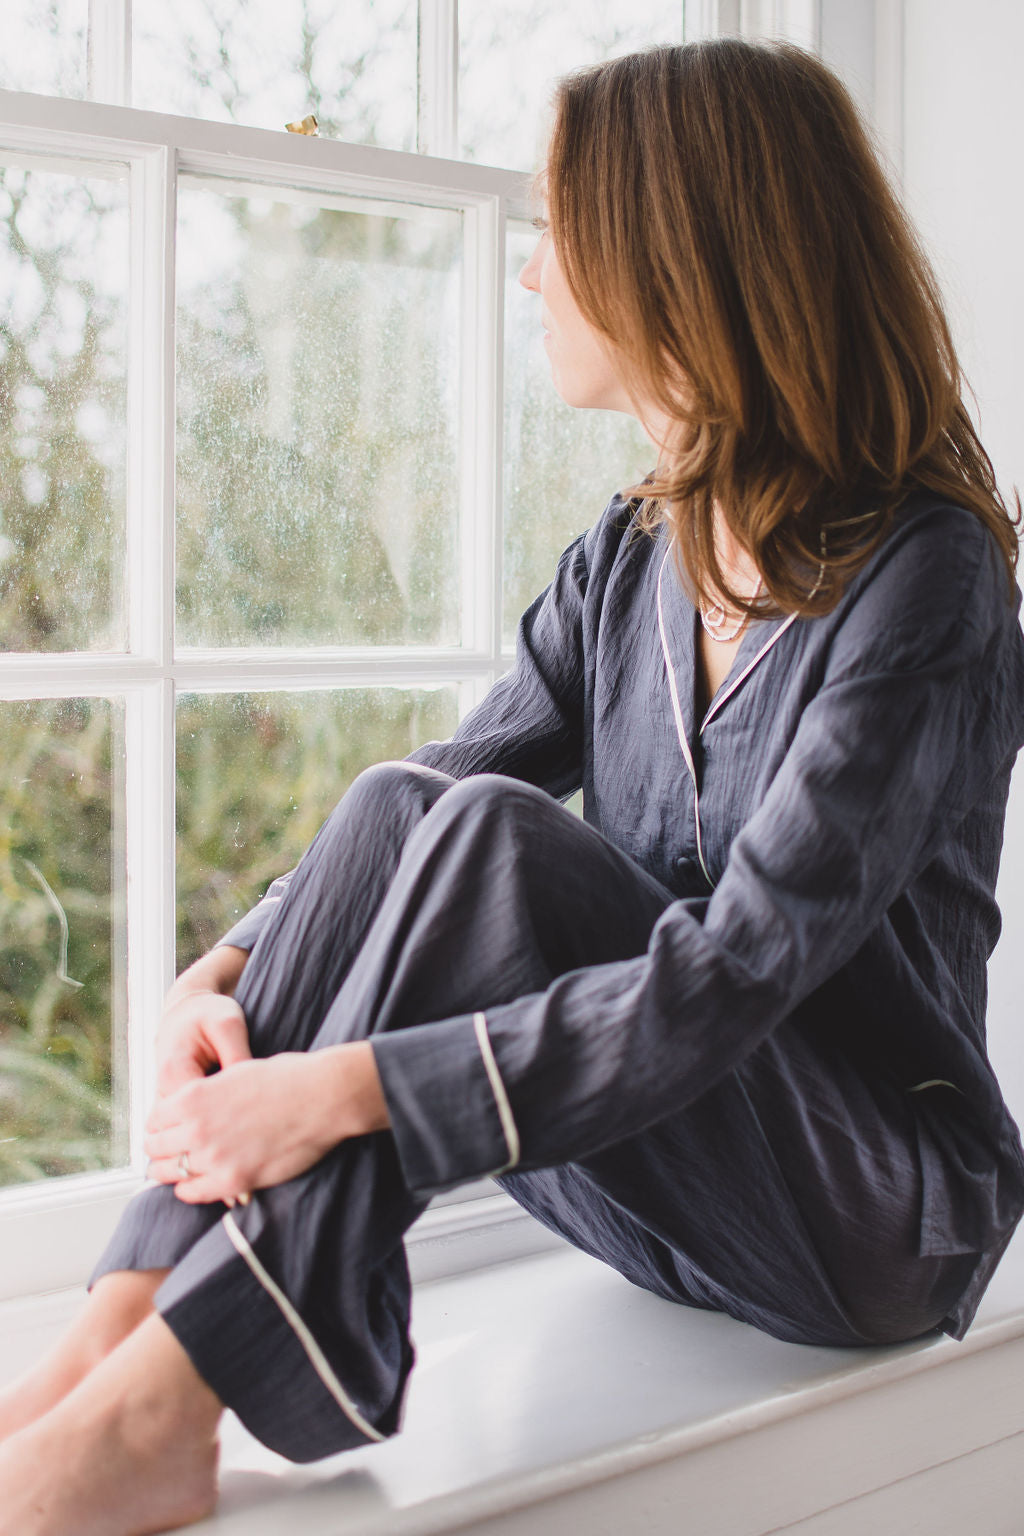 Luxury silk pyjamas, the perfect pj gift for Mother's Day. Beautifully cut pajamas in a lightweight handwoven silk.